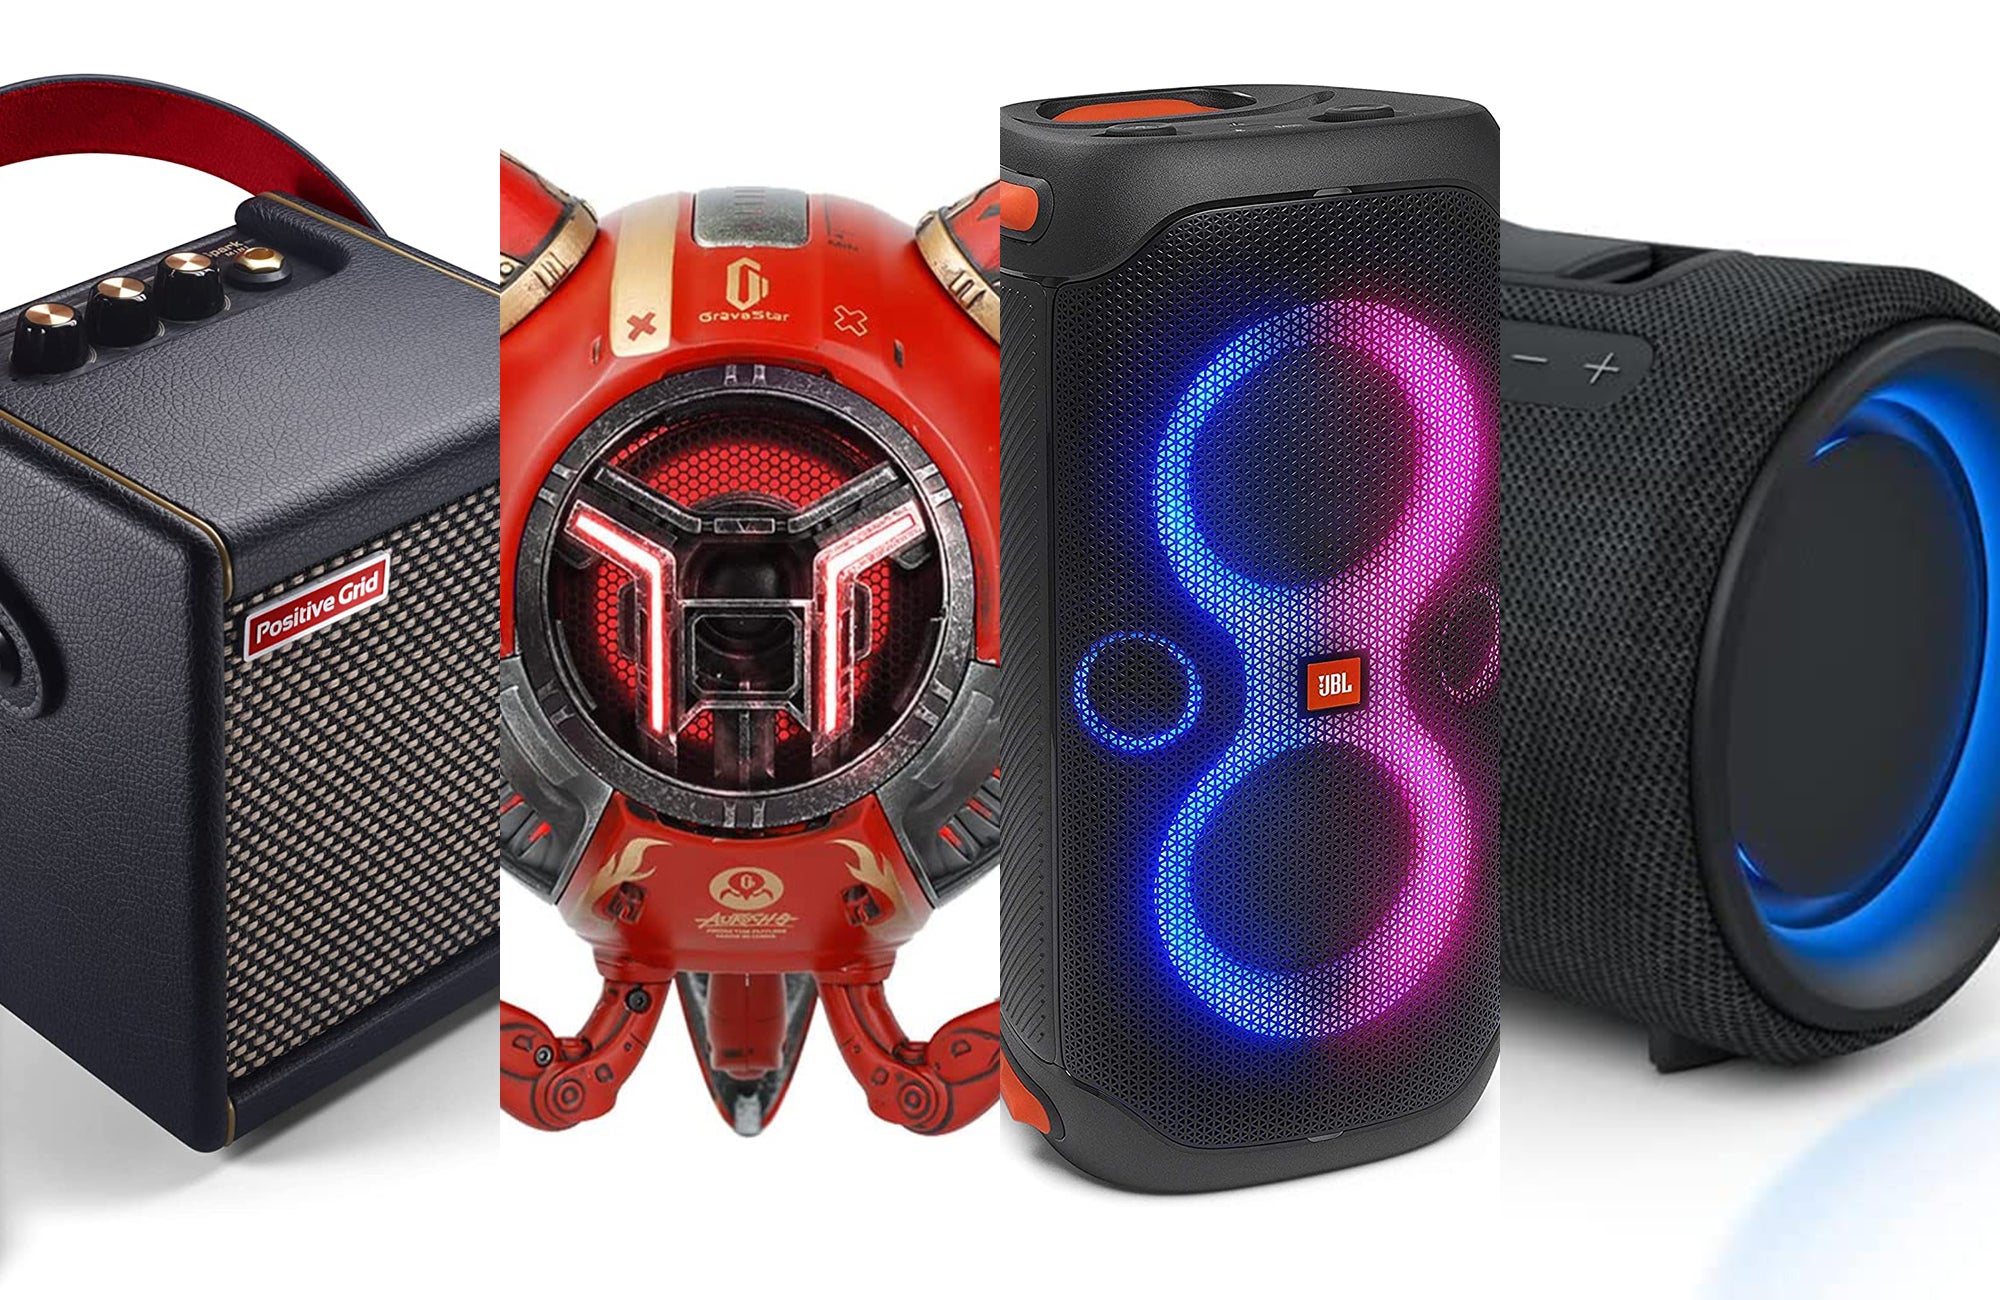 Speaker Covers for JBL Boombox 2 and Boombox 3 Comes in Pairs 